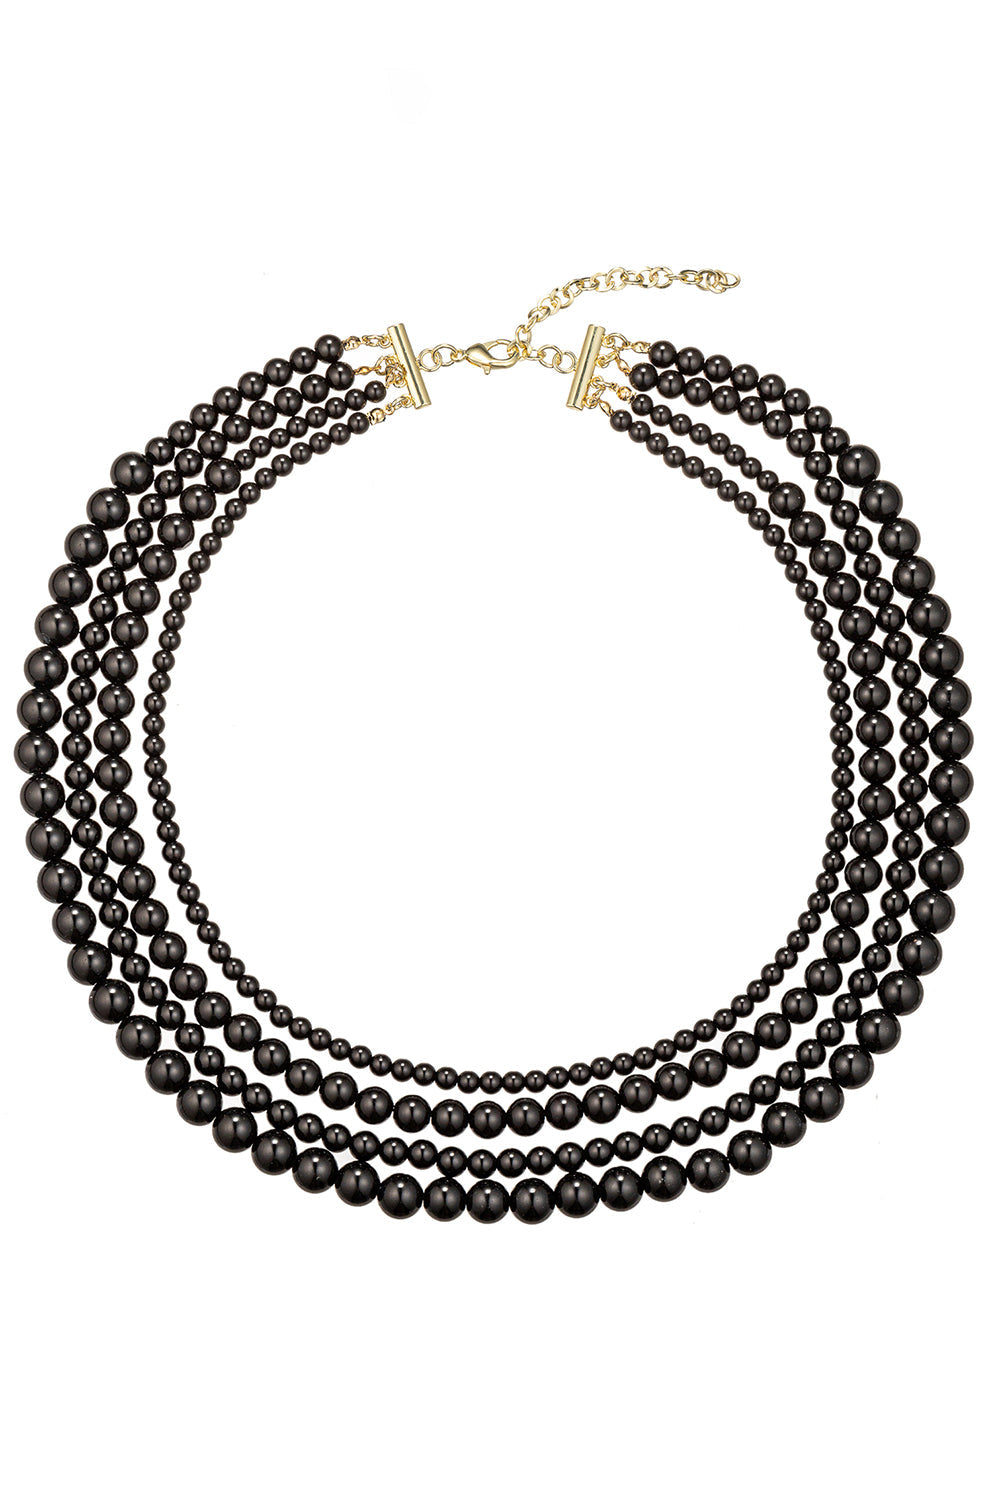 Elevate your style with a multi-strand necklace adorned with onyx agate beads, creating a bold and sophisticated statement.